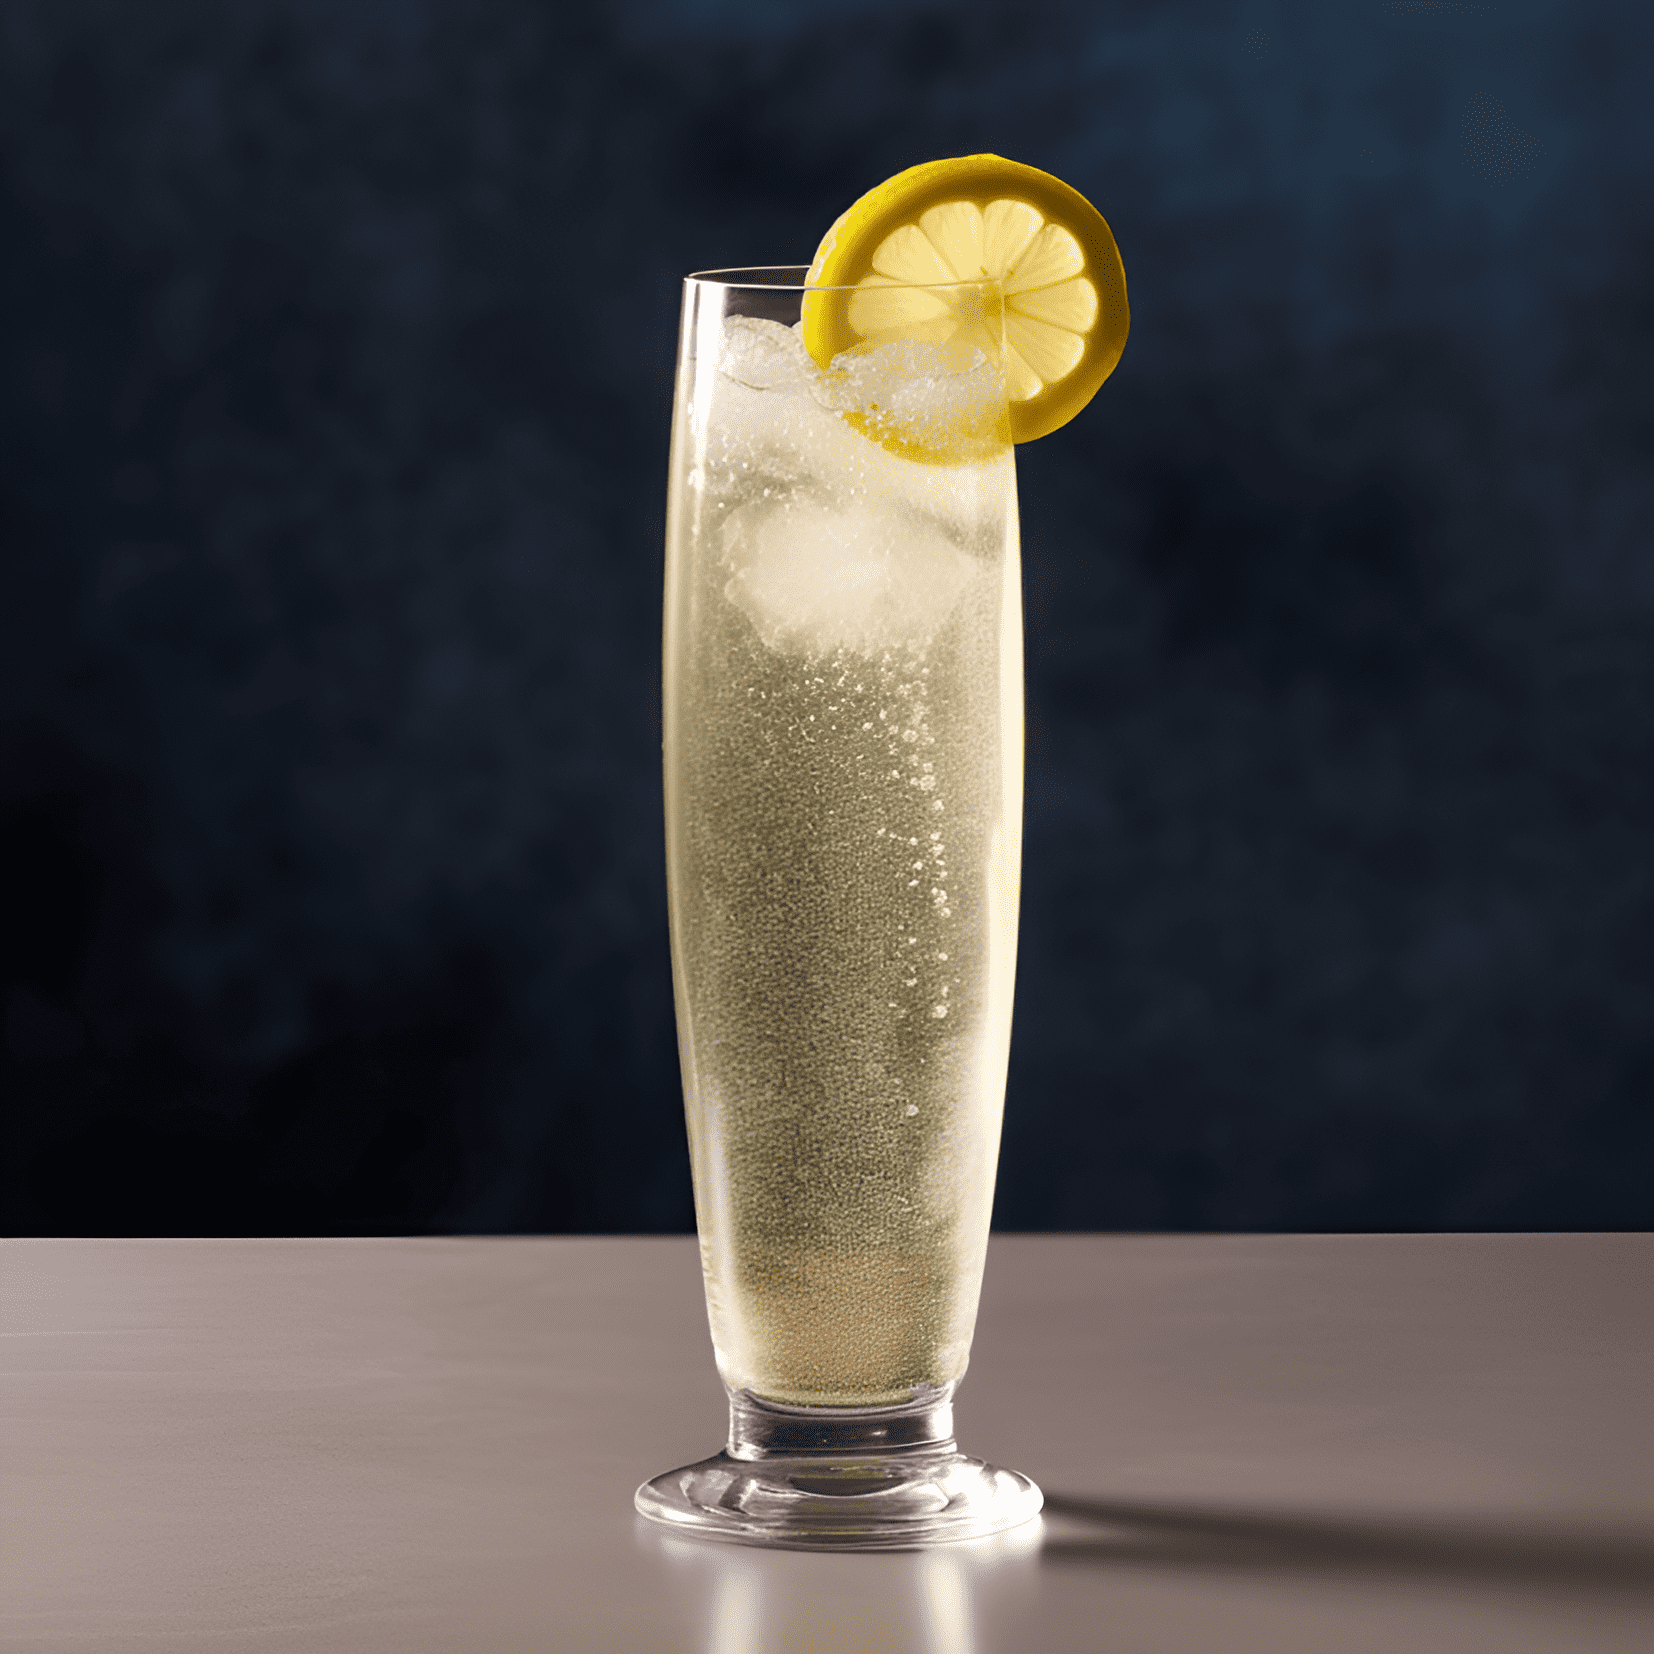 Imperial Fizz Cocktail Recipe - The Imperial Fizz has a balanced, refreshing taste, with a combination of sweet, sour, and slightly bitter flavors. The citrus notes from the lemon juice and orange liqueur provide a bright, tangy taste, while the sugar and egg white add a smooth, creamy texture.